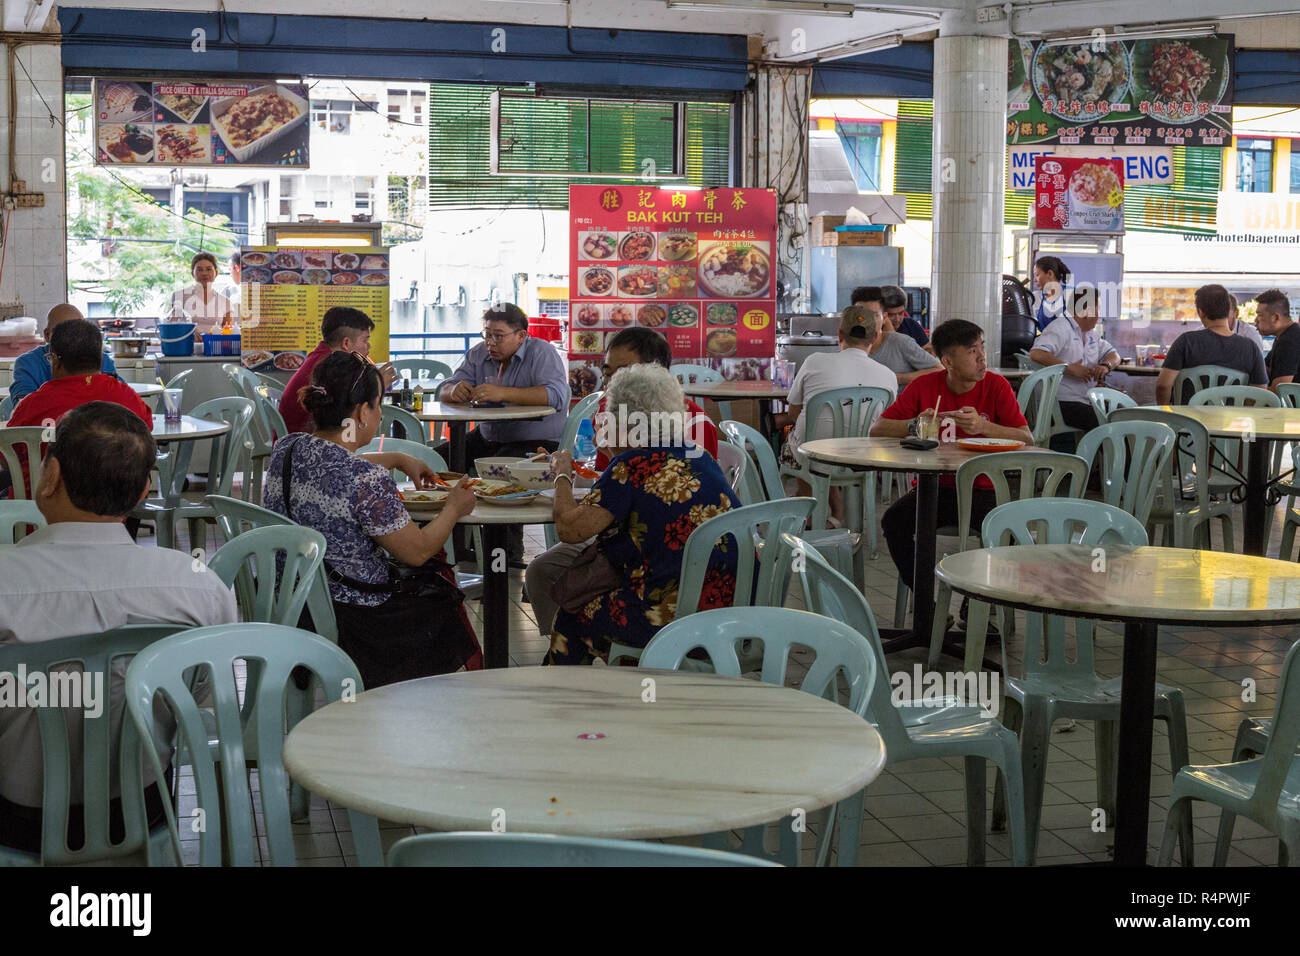 Individual Food Vendors Share Common Seating Area for Diners, Ipoh, Malaysia. Stock Photo